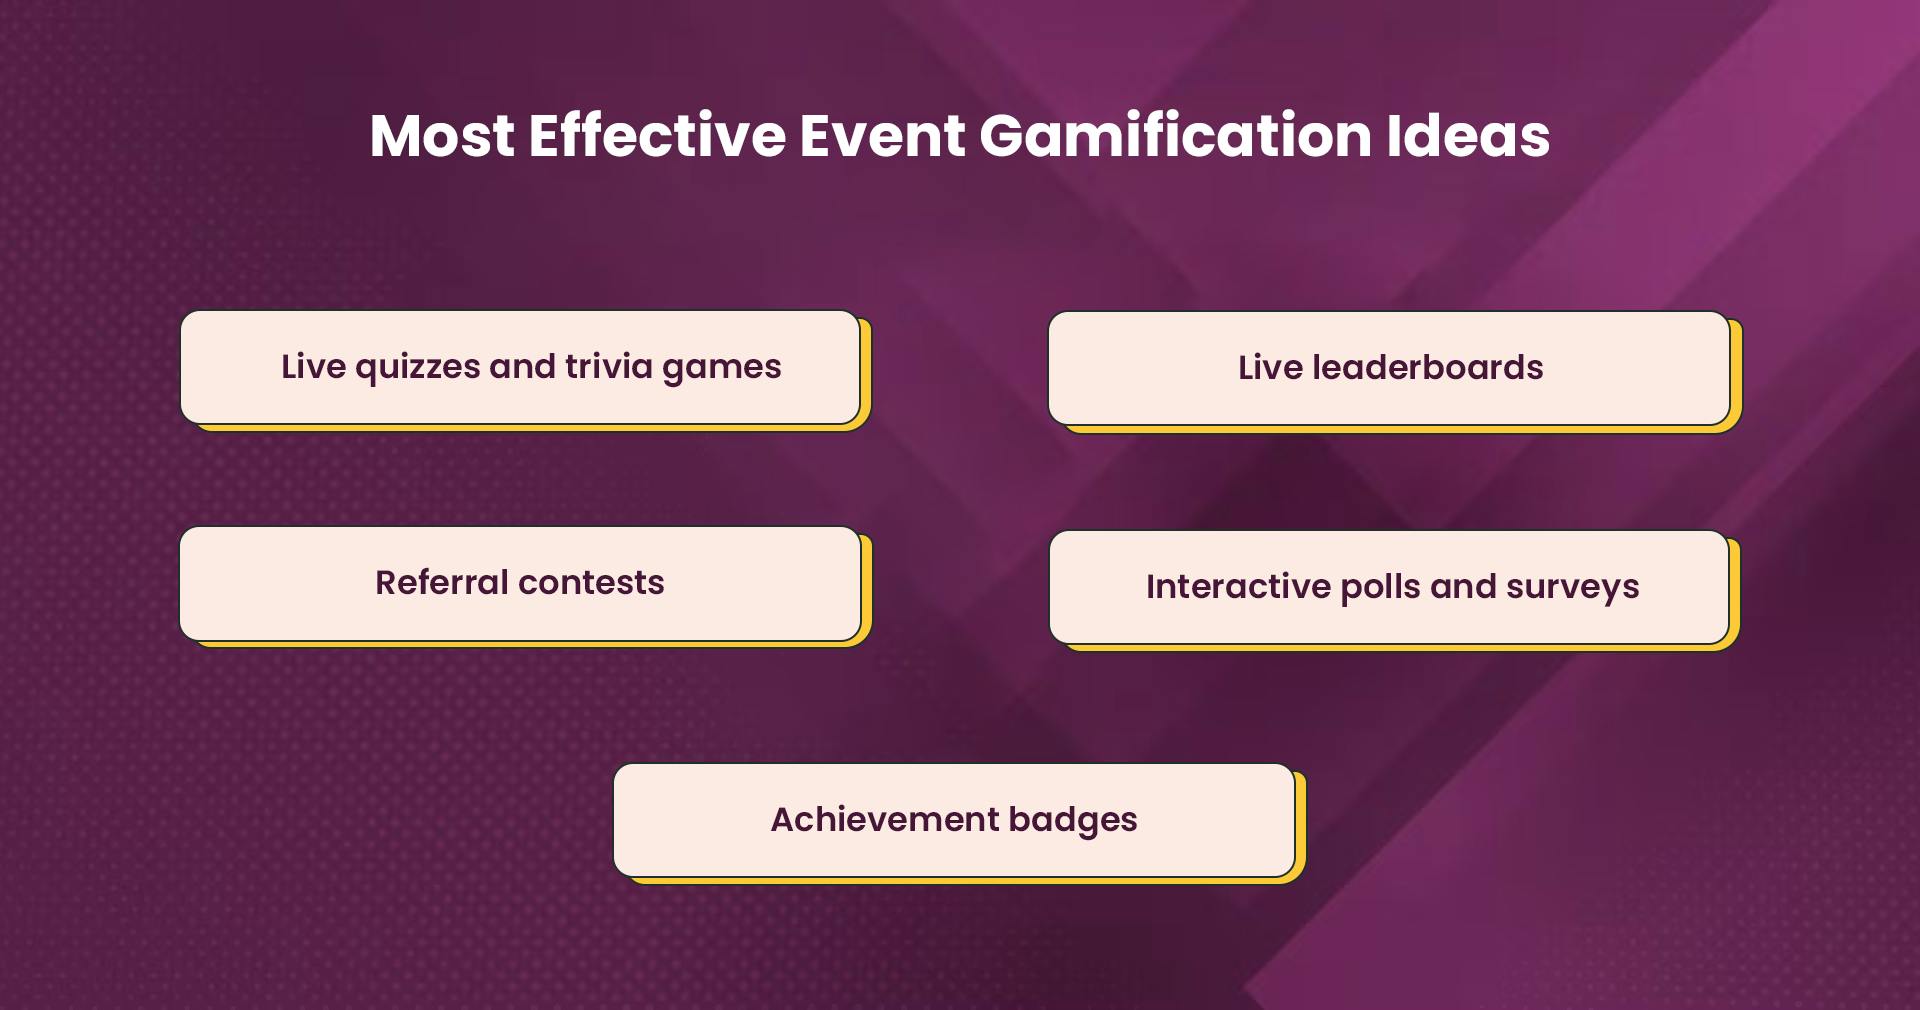 Most popular and effective gamification ideas